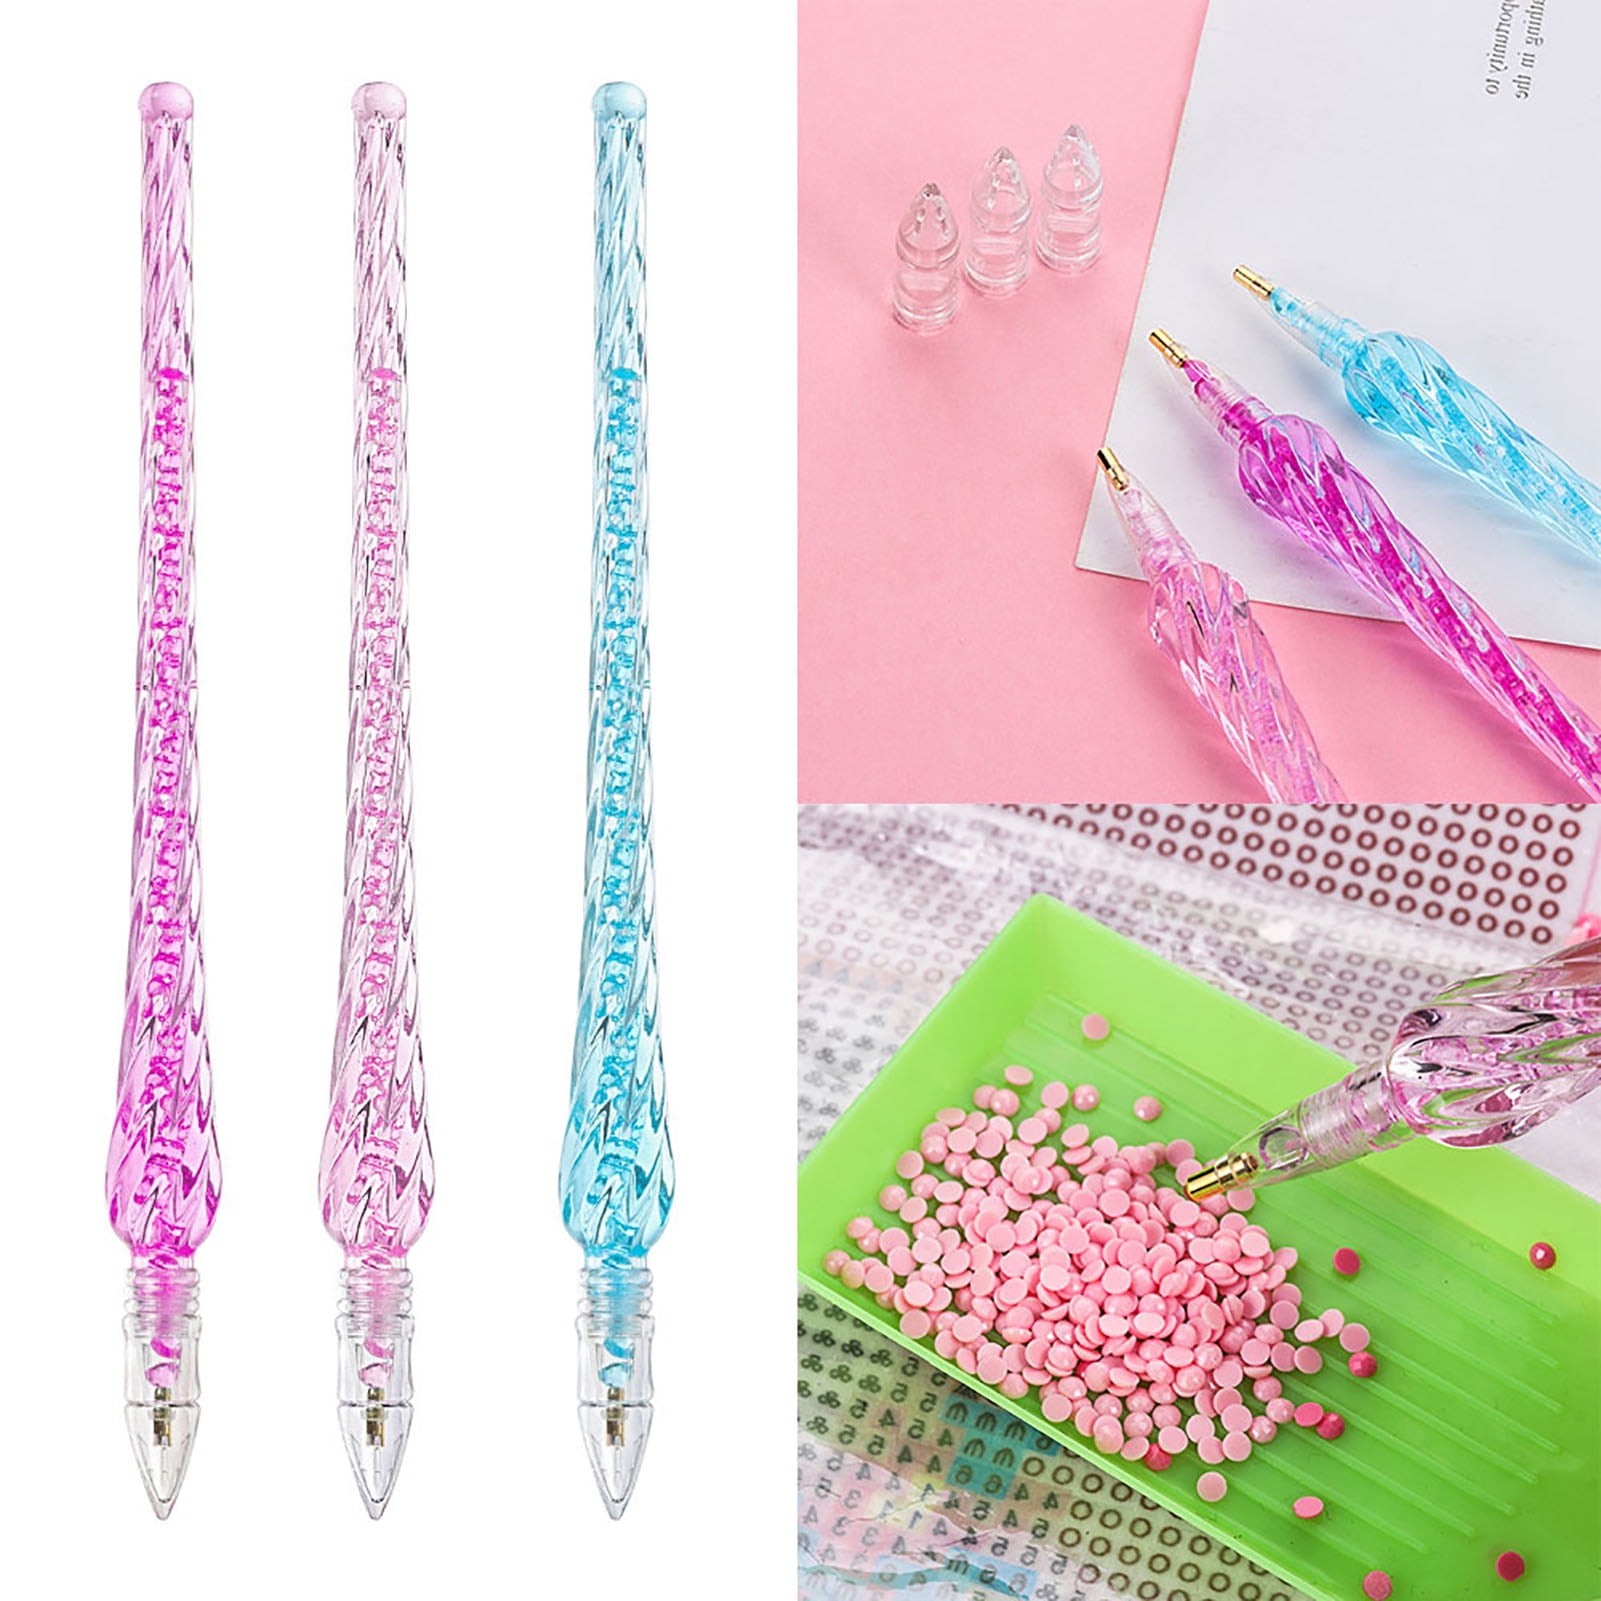 DIAPAI DIY 5D Diamond Painting Pens Resin Tip Point Drill Cross Stitch  Embroidery Sewing Craft Nail Art Accessories Tools